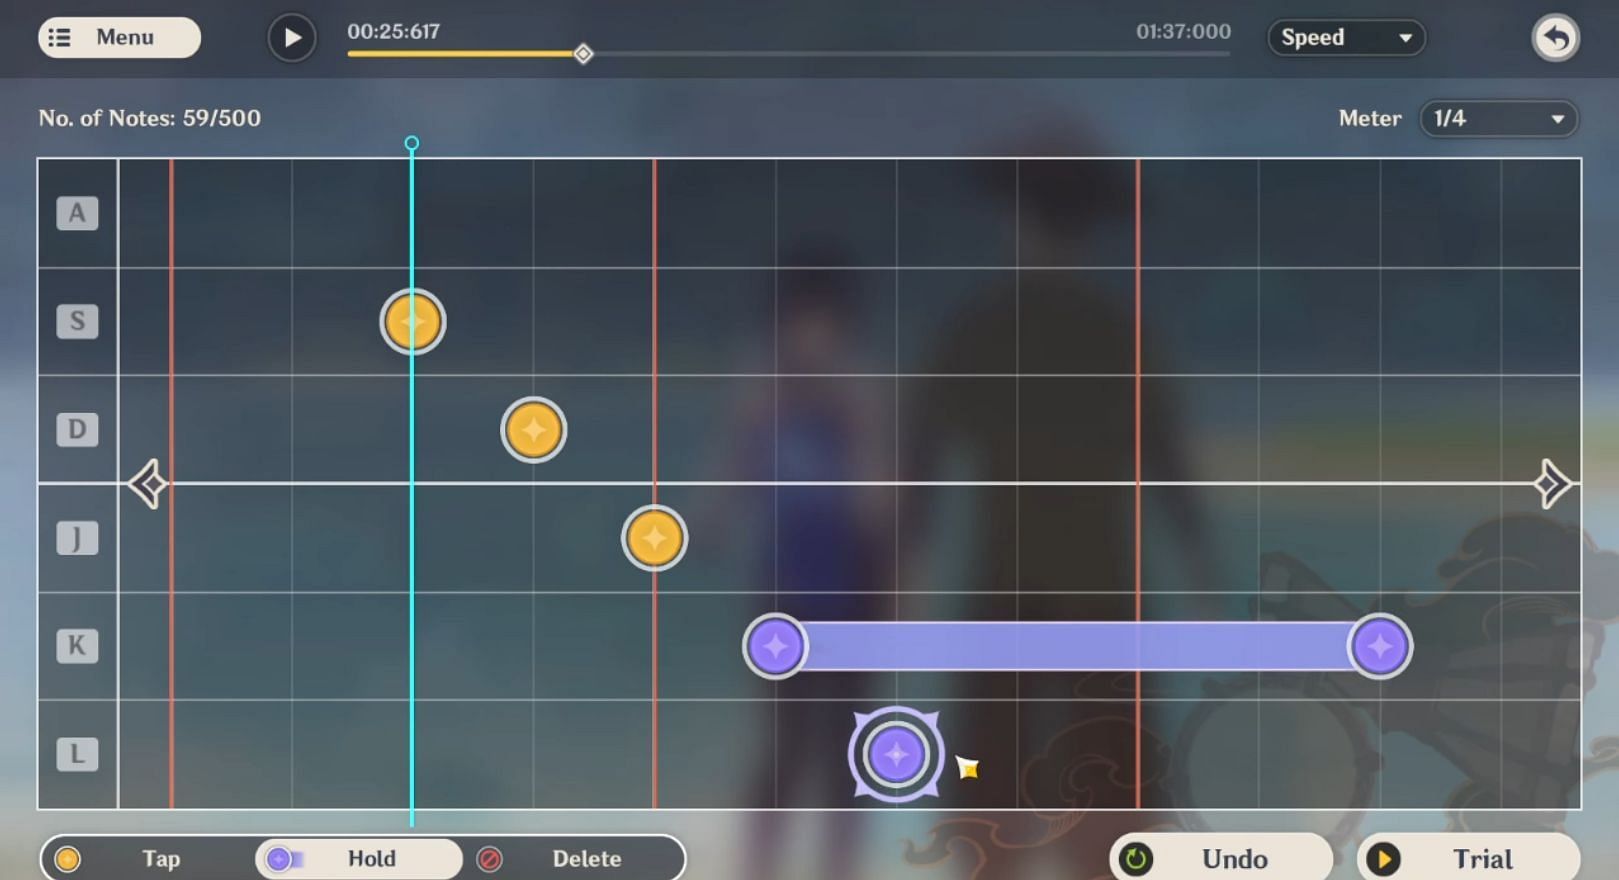 Select the note at the bottom right to add it to the beatmap (Image via HoYoverse)